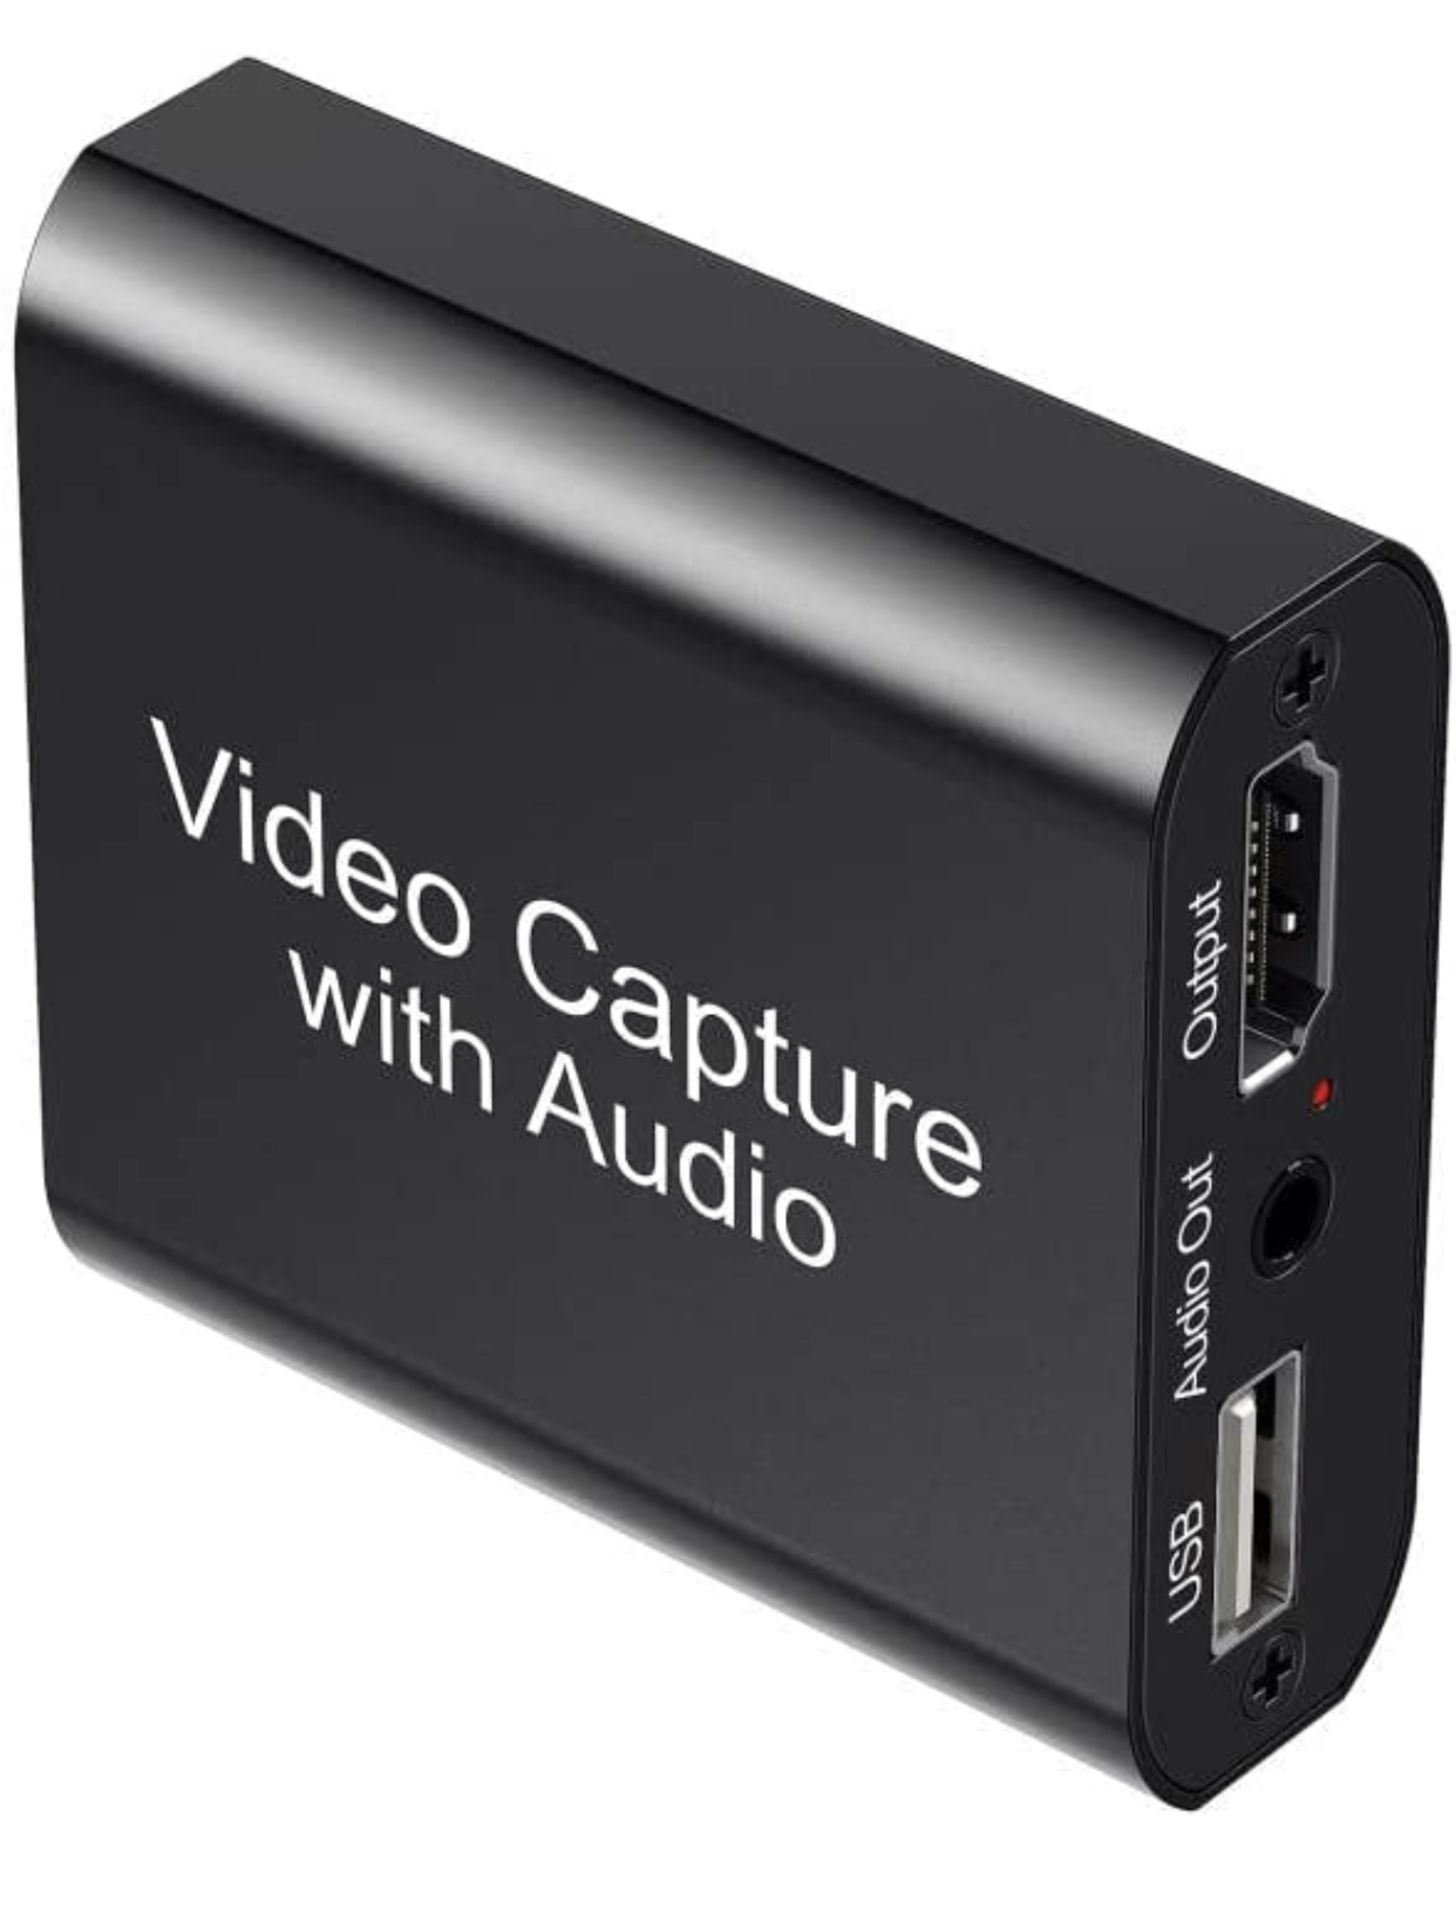 Cotsoco Video Capture Card USB3.0 HDMI Video Capture Device RRP £22.99